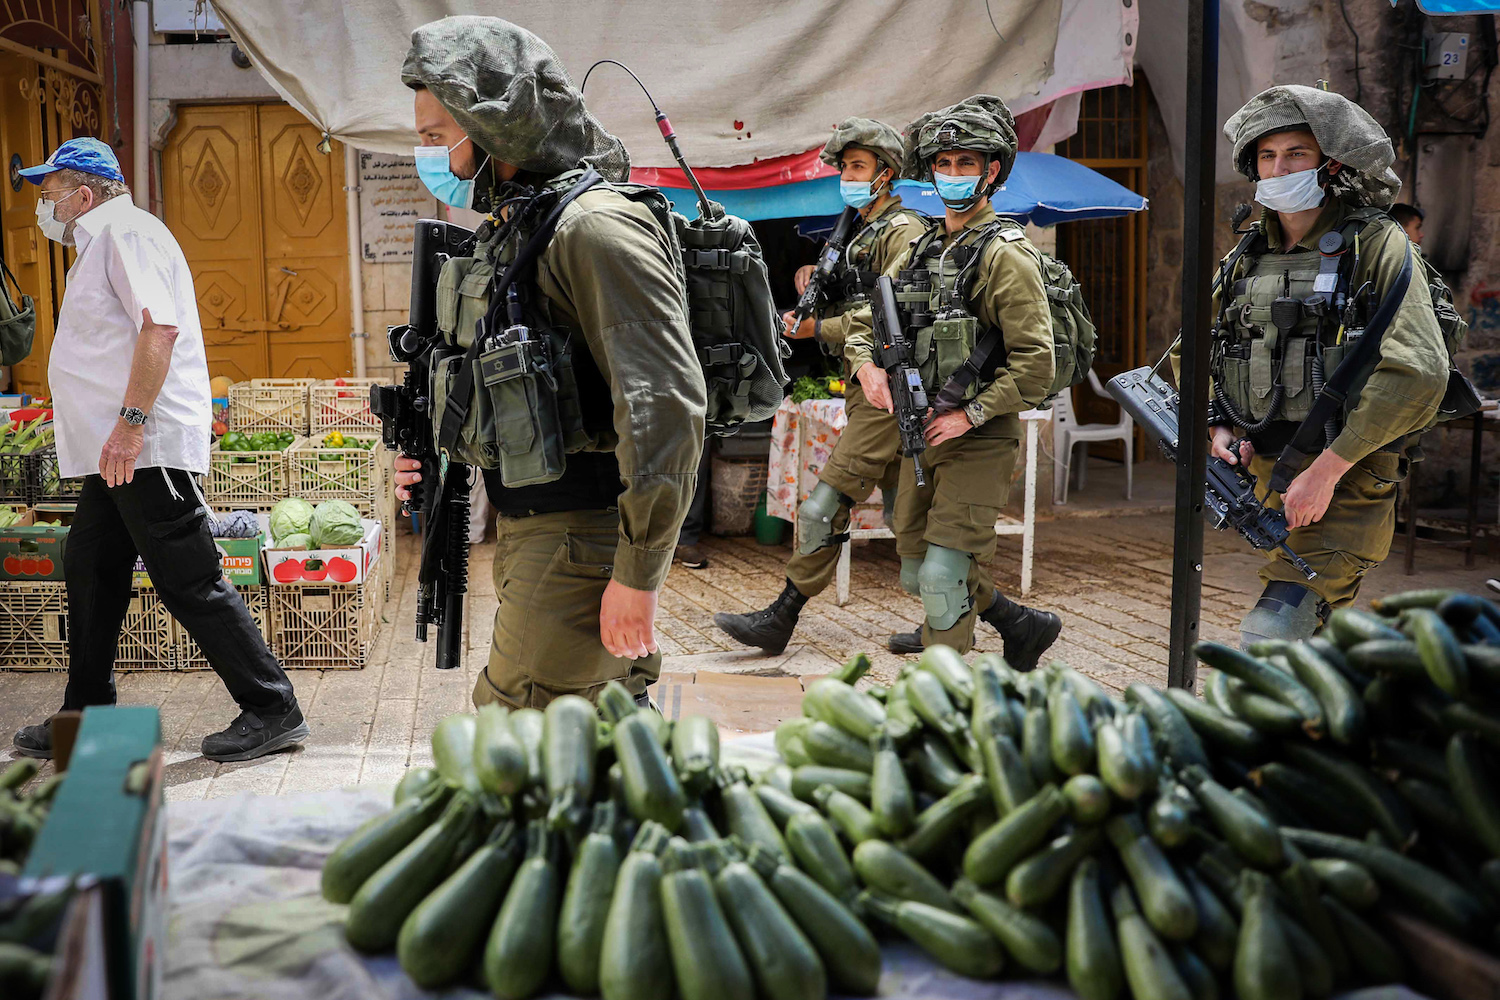 Israeli soldiers accompany a group of Jewish tourists in the West Bank city of Hebron, May 16, 2020. (Wisam Hashlamoun/Flash90)